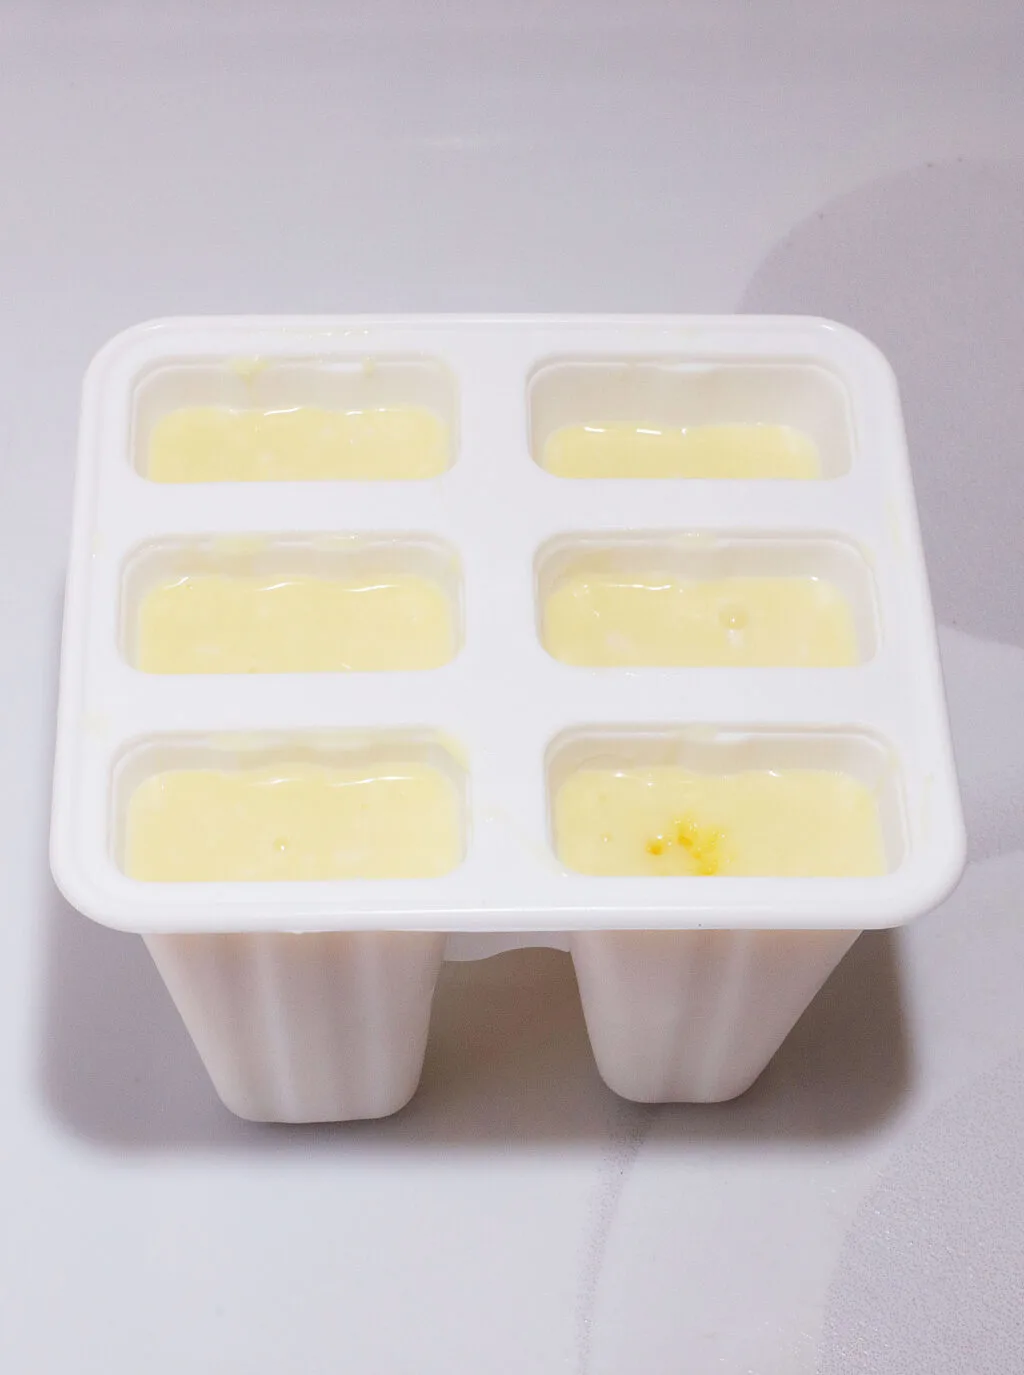 pina colada popsicle molds filled